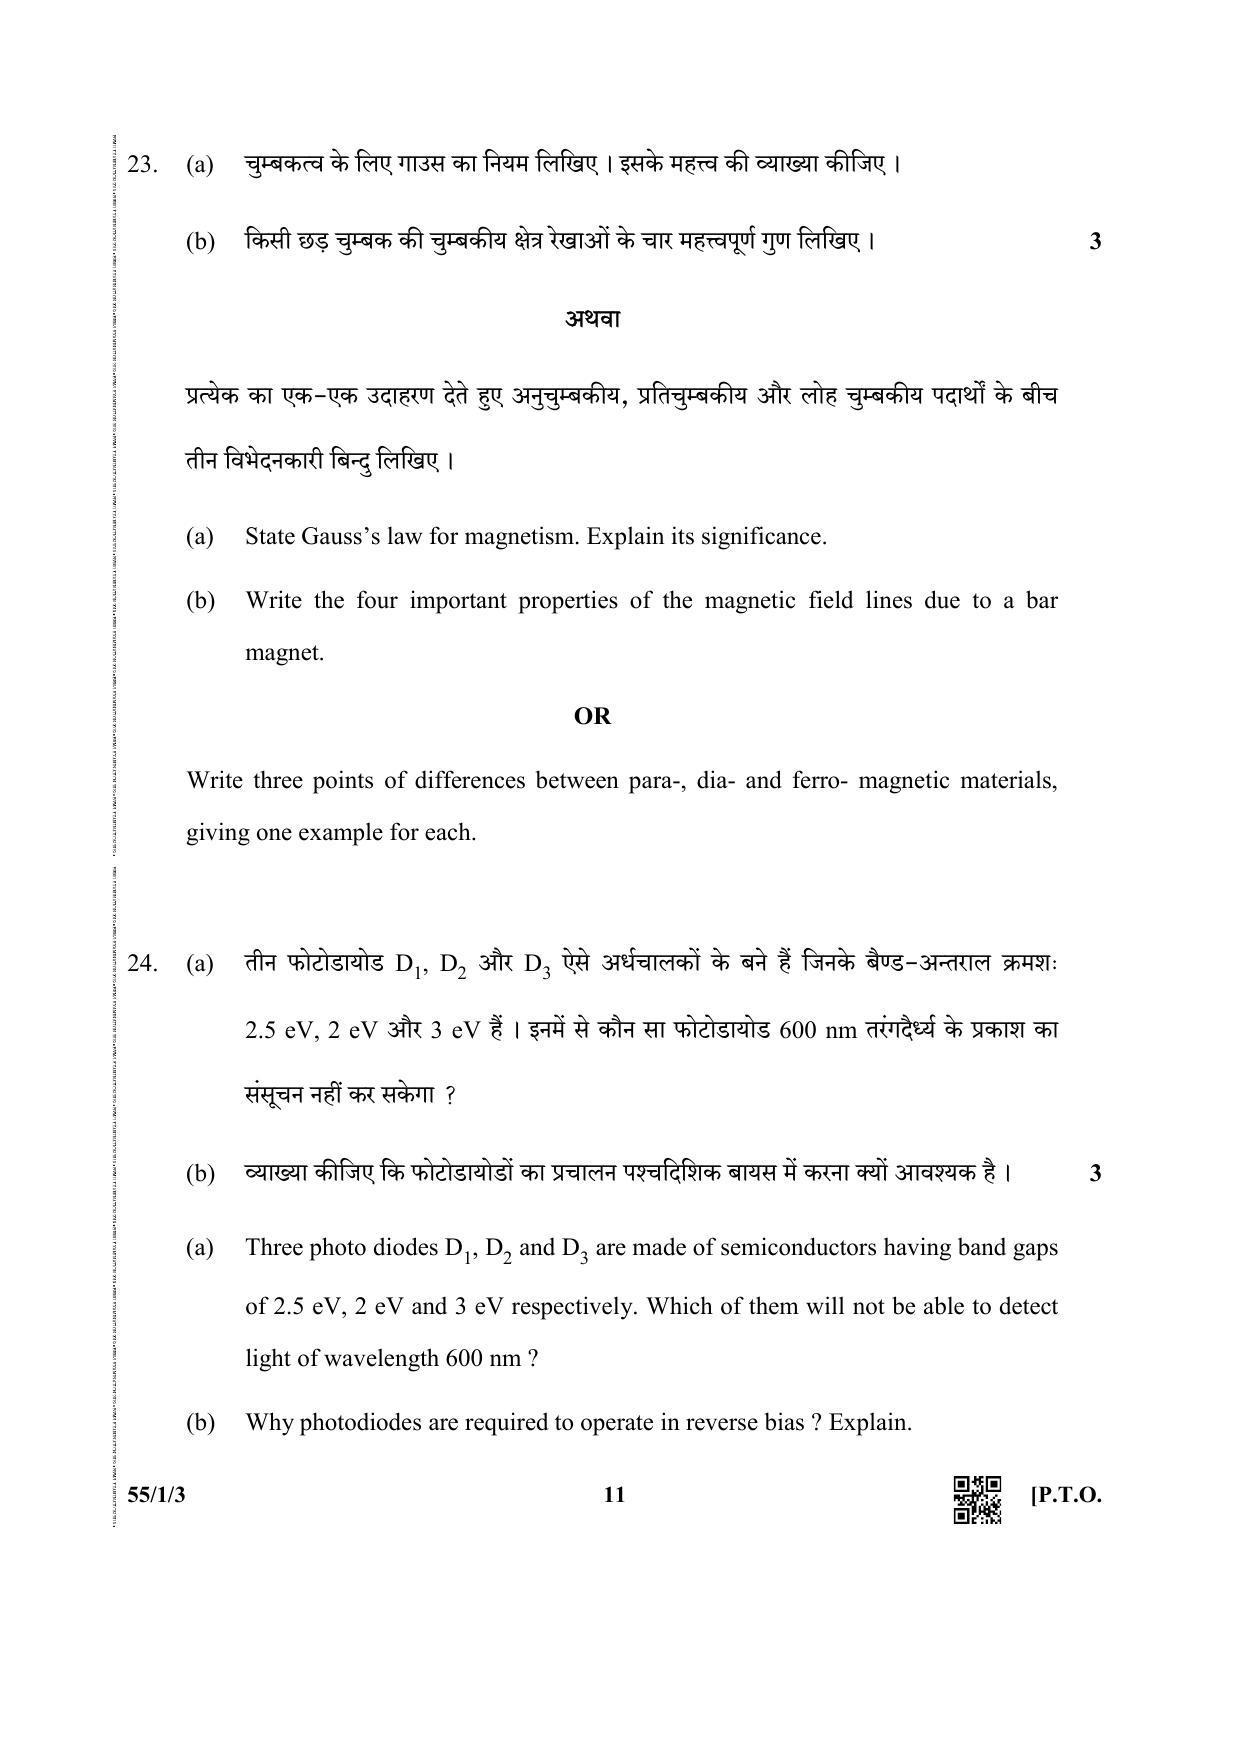 CBSE Class 12 55-1-3 (Physics) 2019 Question Paper - Page 11